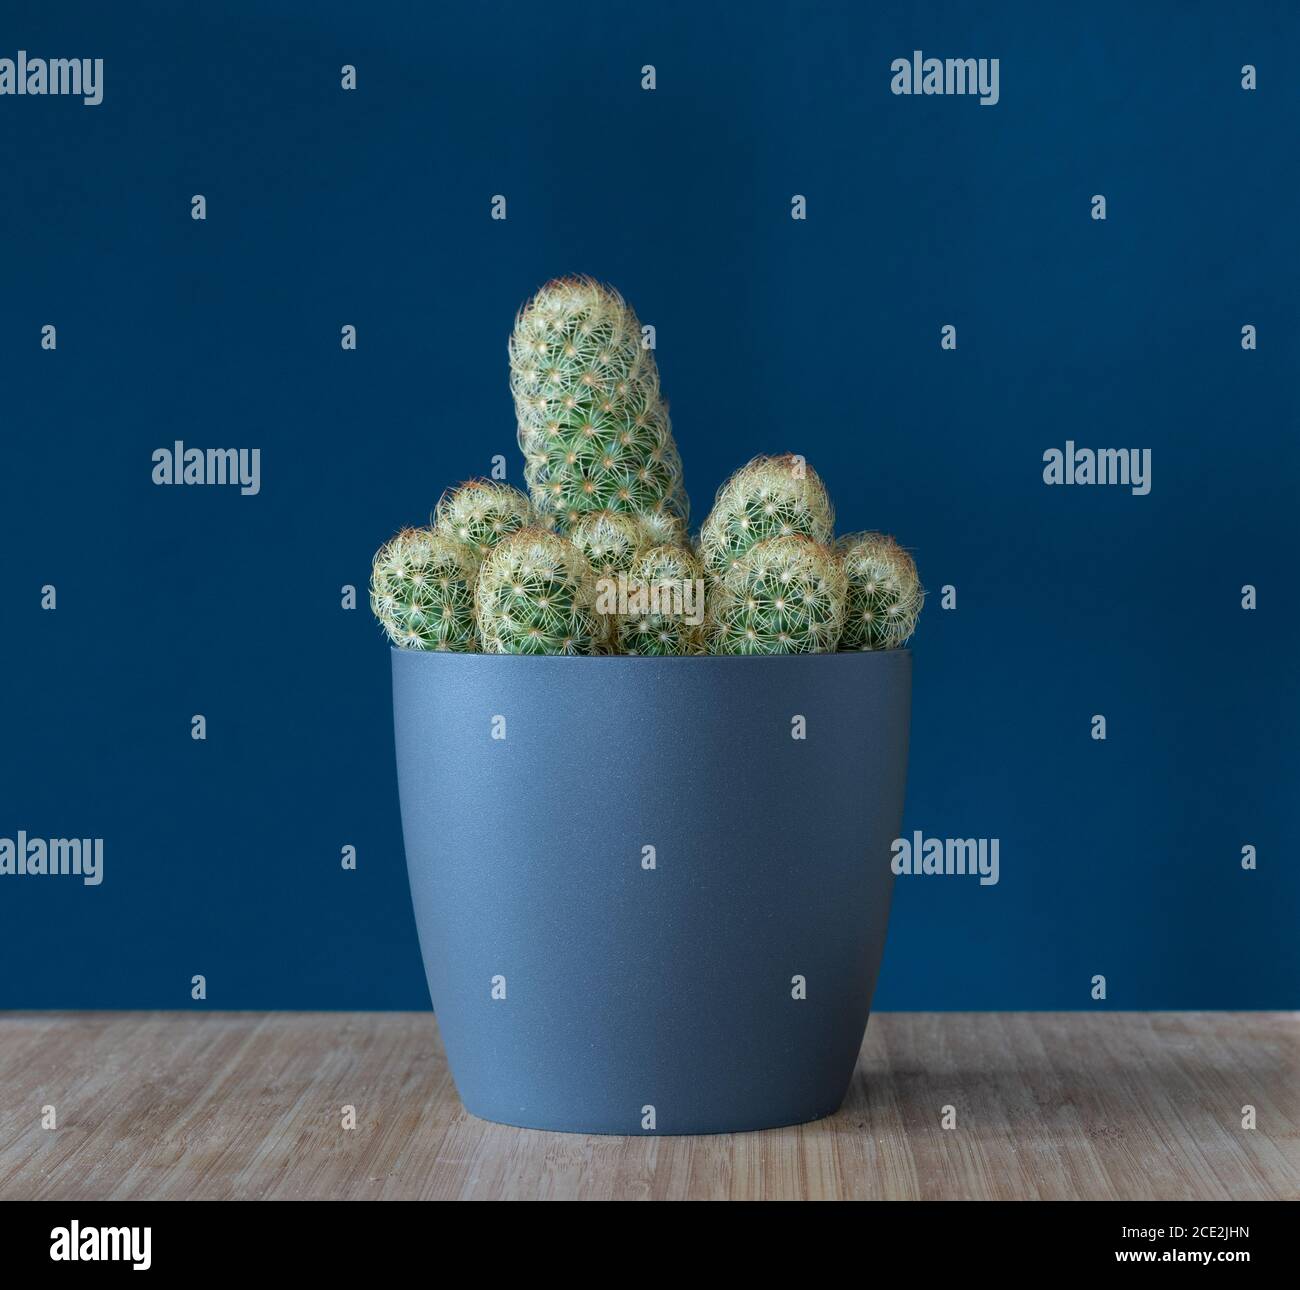 Mammillaria Elongata - Lady Fingers Cactus - pot plant in blue teal pot against blue teal background Stock Photo